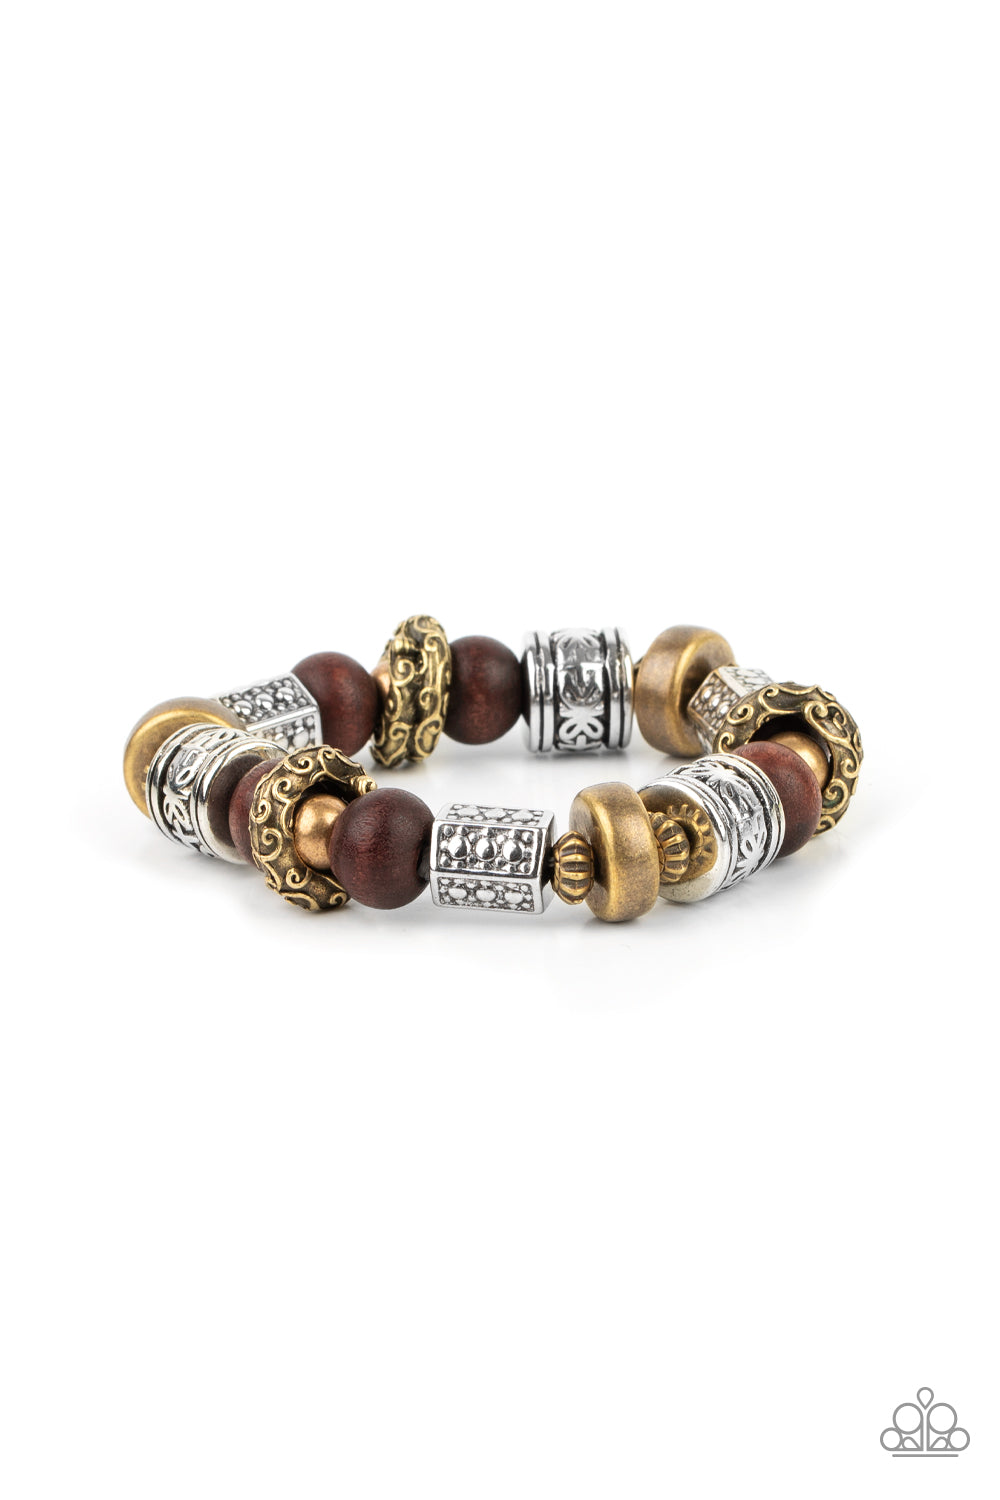 Exploring The Elements Multi Bracelet - Paparazzi Accessories  Stamped, studded, and embossed in tribal inspired patterns, a collection of chunky brass and silver beads join earthy wooden beads along a stretchy band around the wrist for an earthy flair.  All Paparazzi Accessories are lead free and nickel free!  Sold as one individual bracelet.